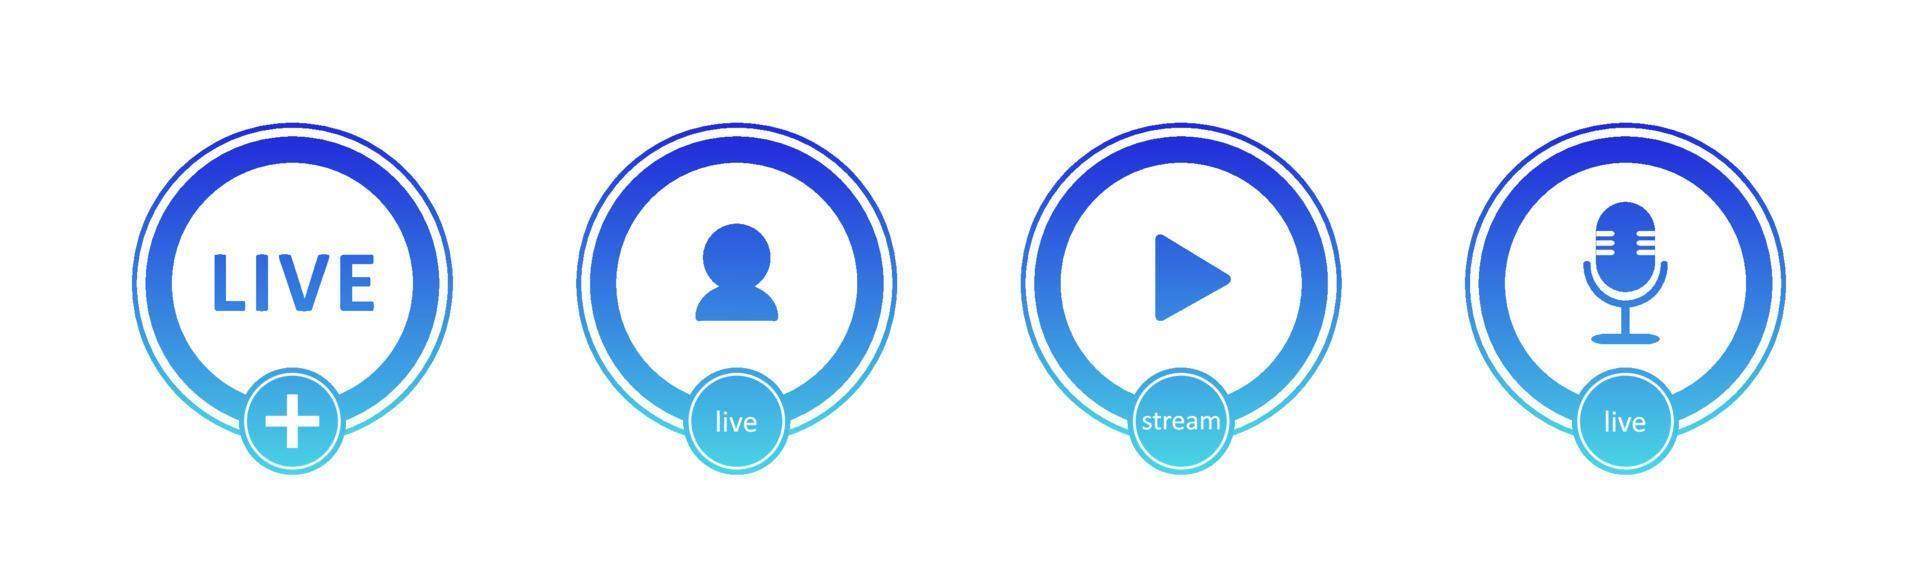 Set of live streaming icons. Gradient symbols and buttons of live streaming, broadcasting, online webinar. Label for tv, shows, movies and live performances. Vector flat illustration. EPS10.